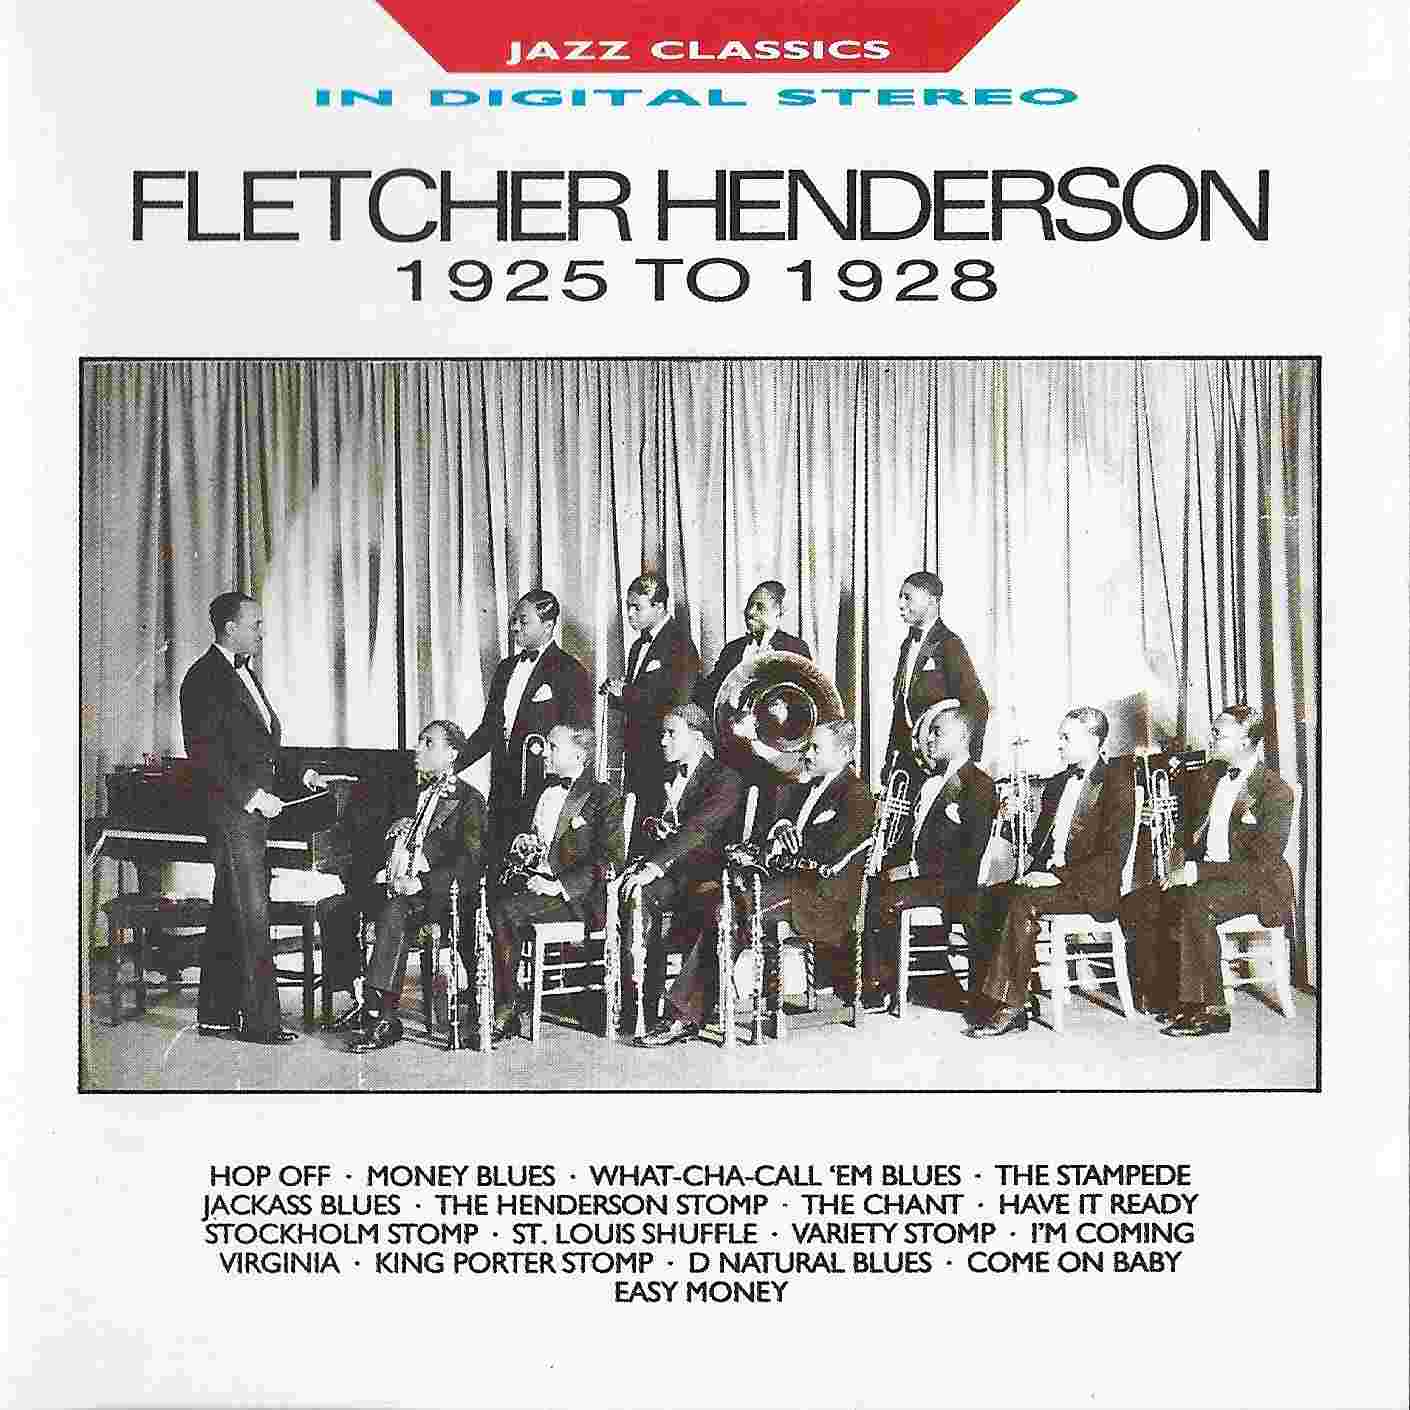 Picture of BBCCD720 Jazz classics - Fletcher Henderson 1925 - 1928 by artist Fletcher Henderson  from the BBC cds - Records and Tapes library